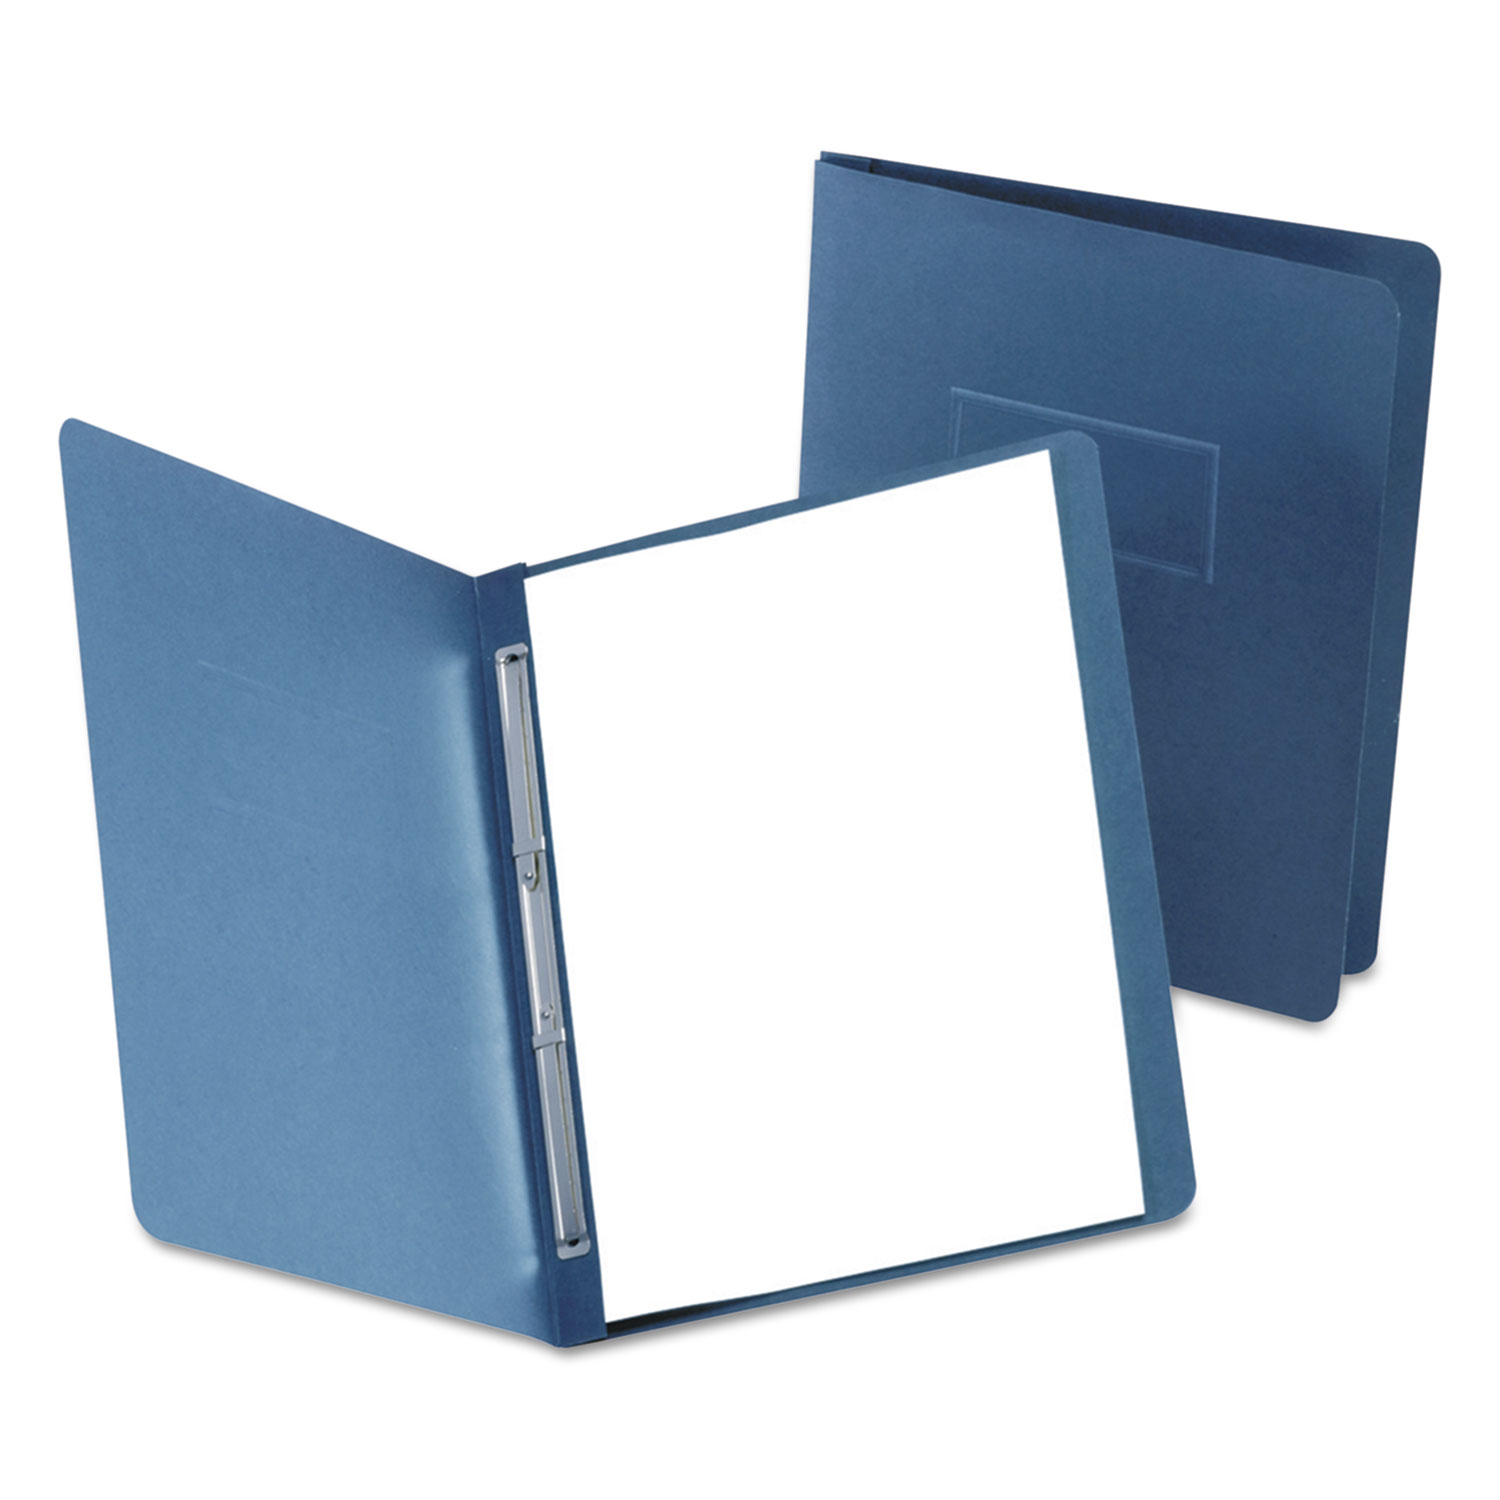  Oxford 5730123 Paper Report Cover, Large 2 Prong Fastener, Letter, 3 Capacity, Dk Blue, 25/Box (OXF5730123) 